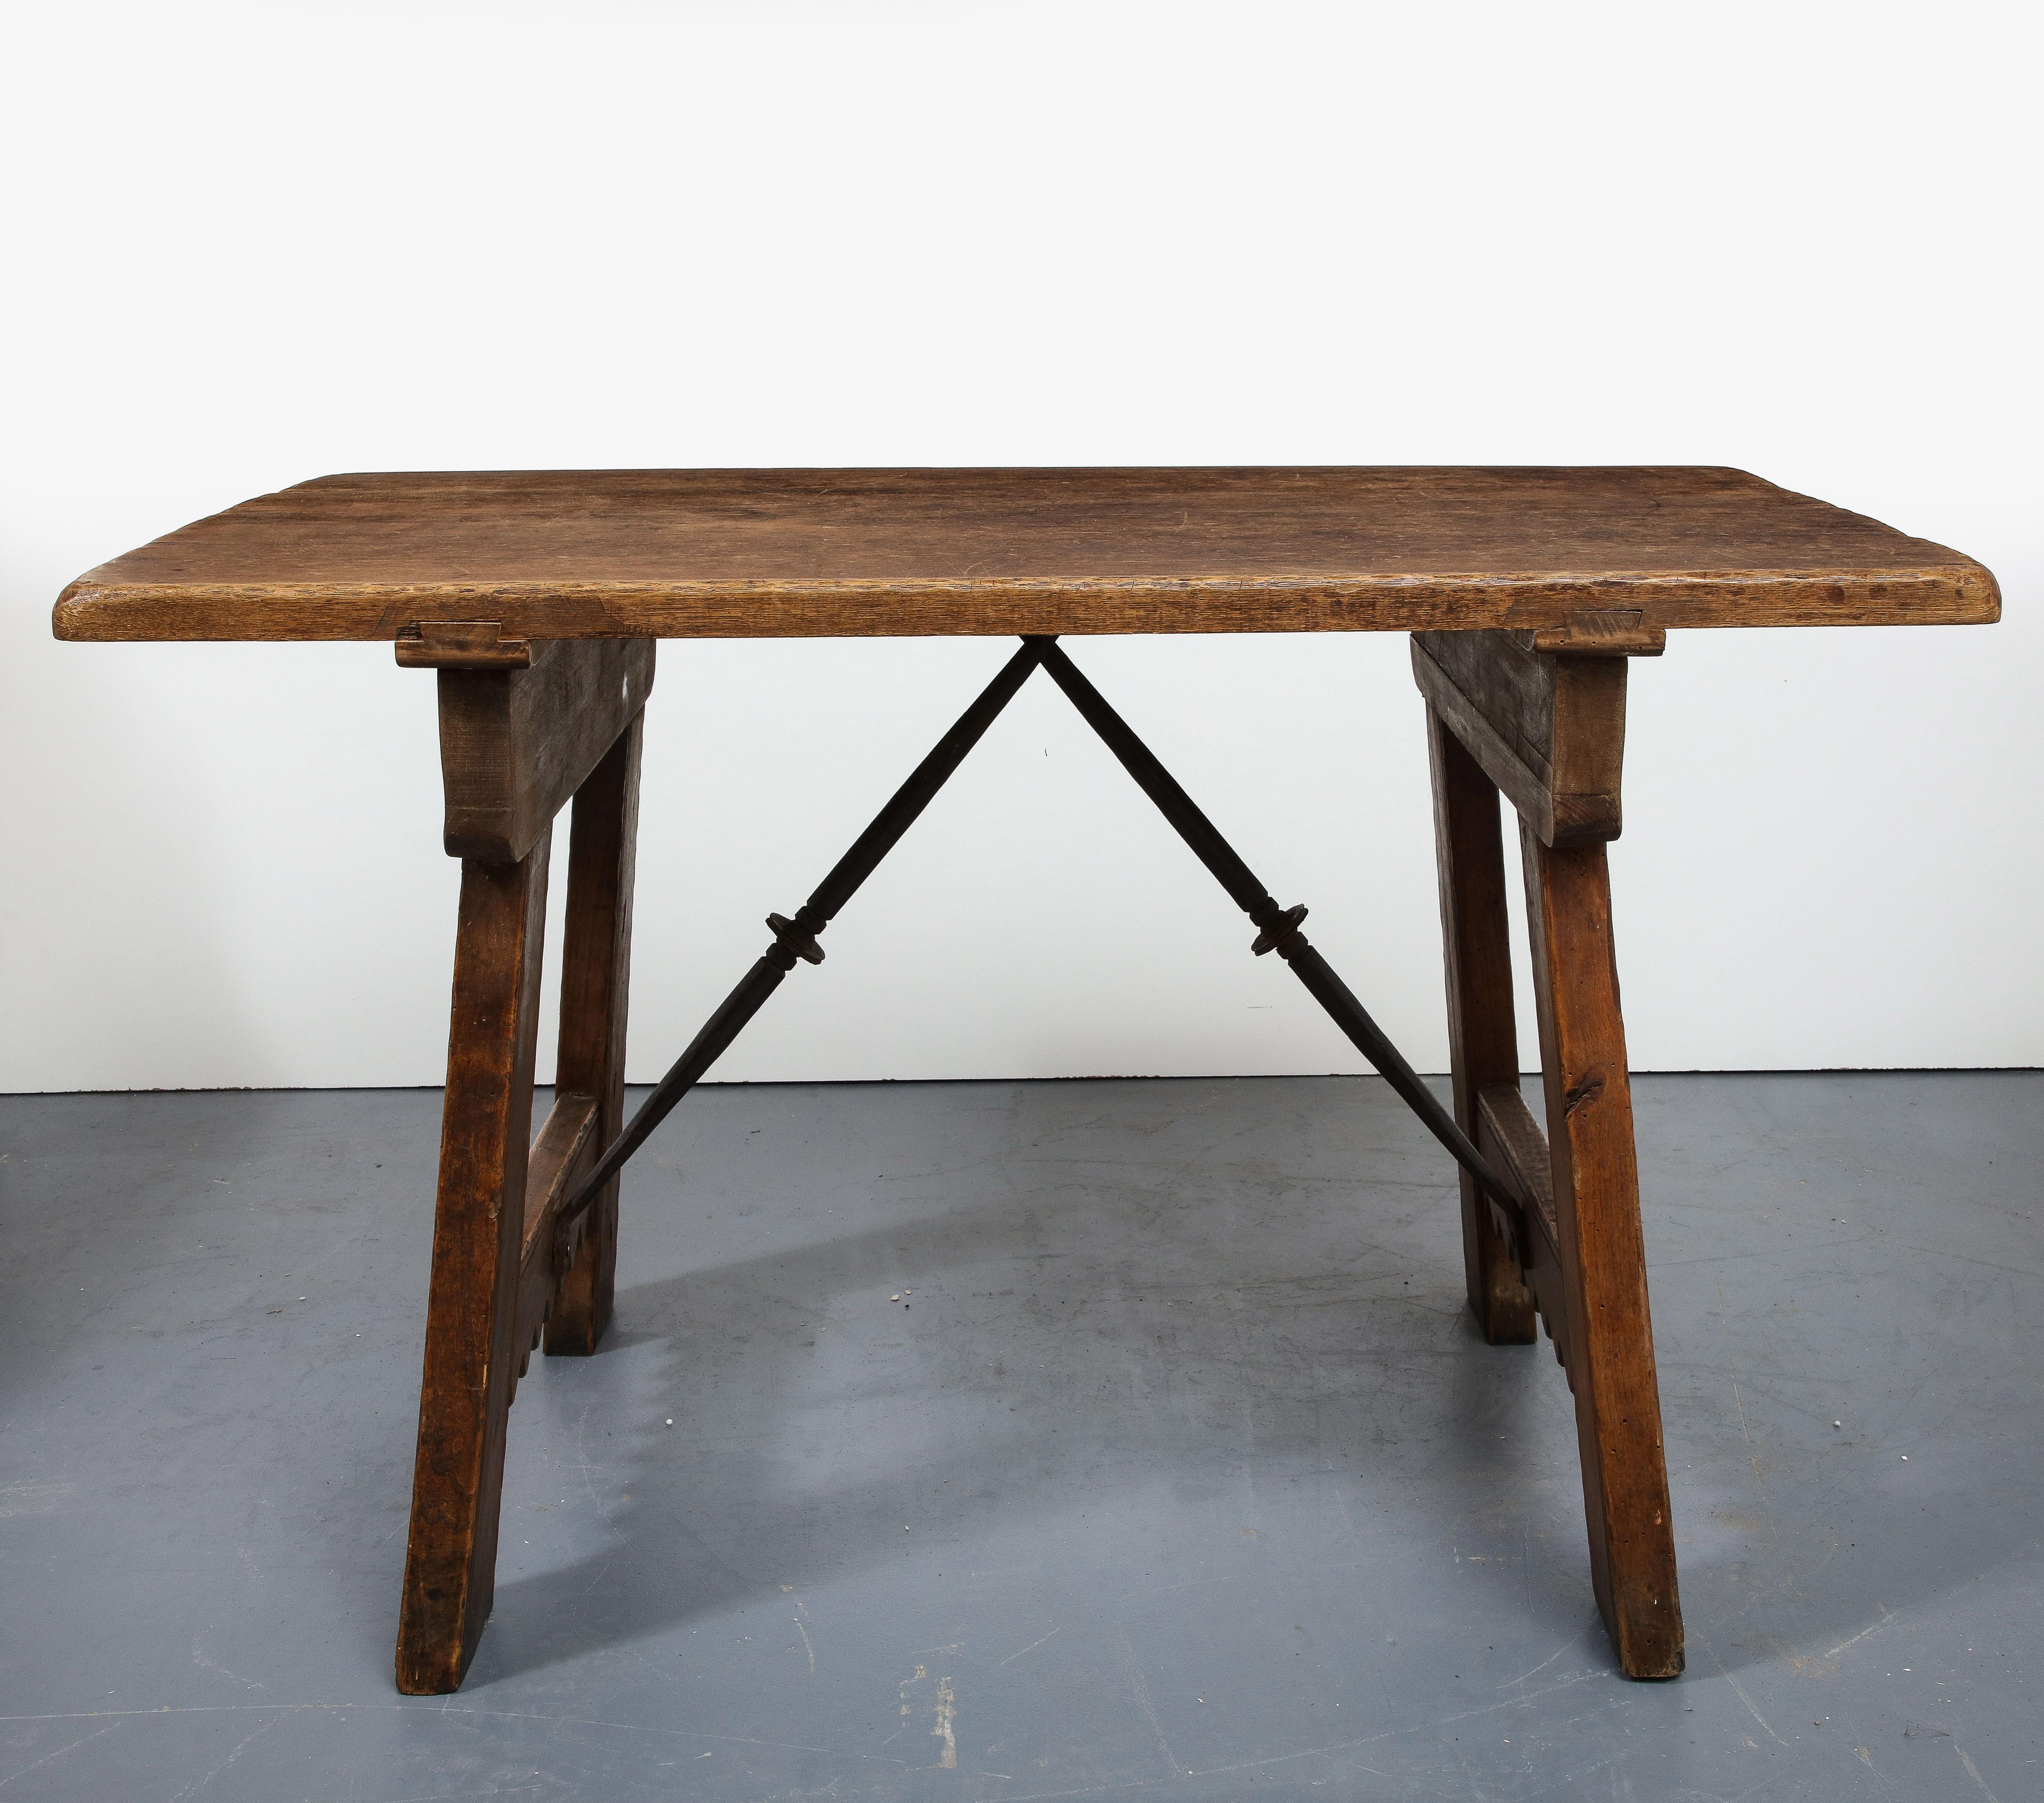 Chestnut and elm table, Spain, circa 1910. 

Rustic, storied table with exceptional construction and beautiful hard-carved details.